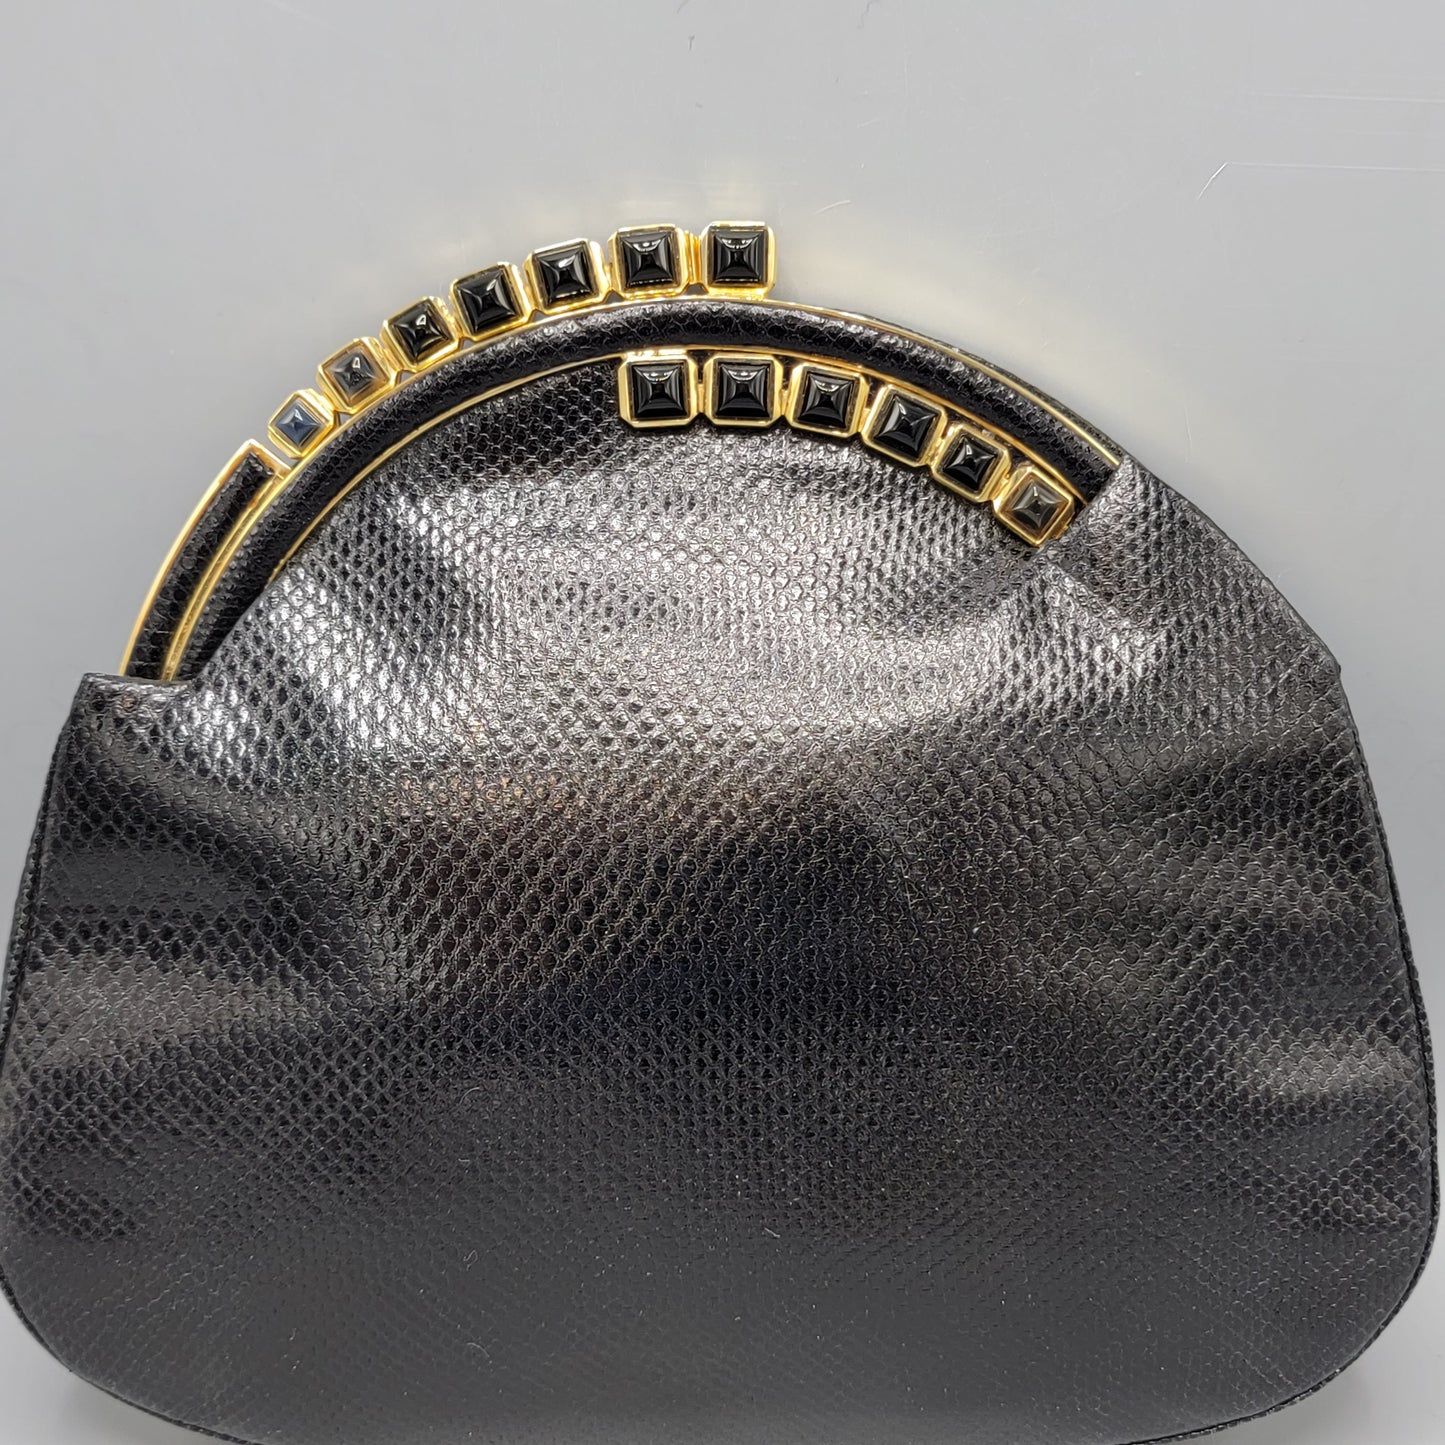 Judith Leiber Black Simulated Snakeskin Handbag / Clutch with Accessories